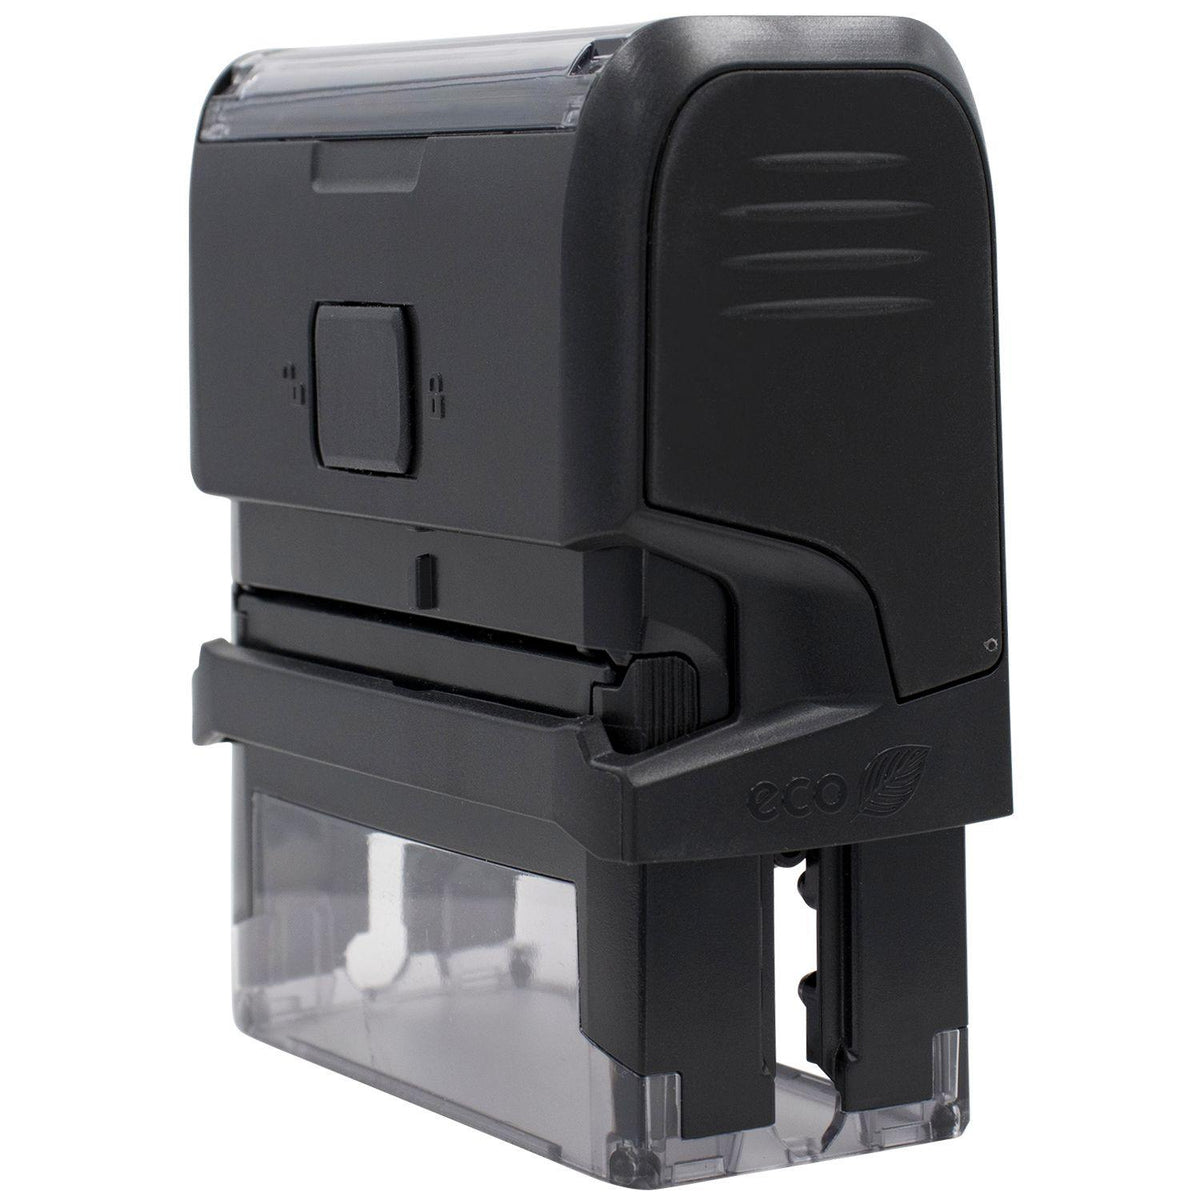 Large Self-Inking Cursive Draft Stamp - Engineer Seal Stamps - Brand_Trodat, Impression Size_Large, Stamp Type_Self-Inking Stamp, Type of Use_General, Type of Use_Office